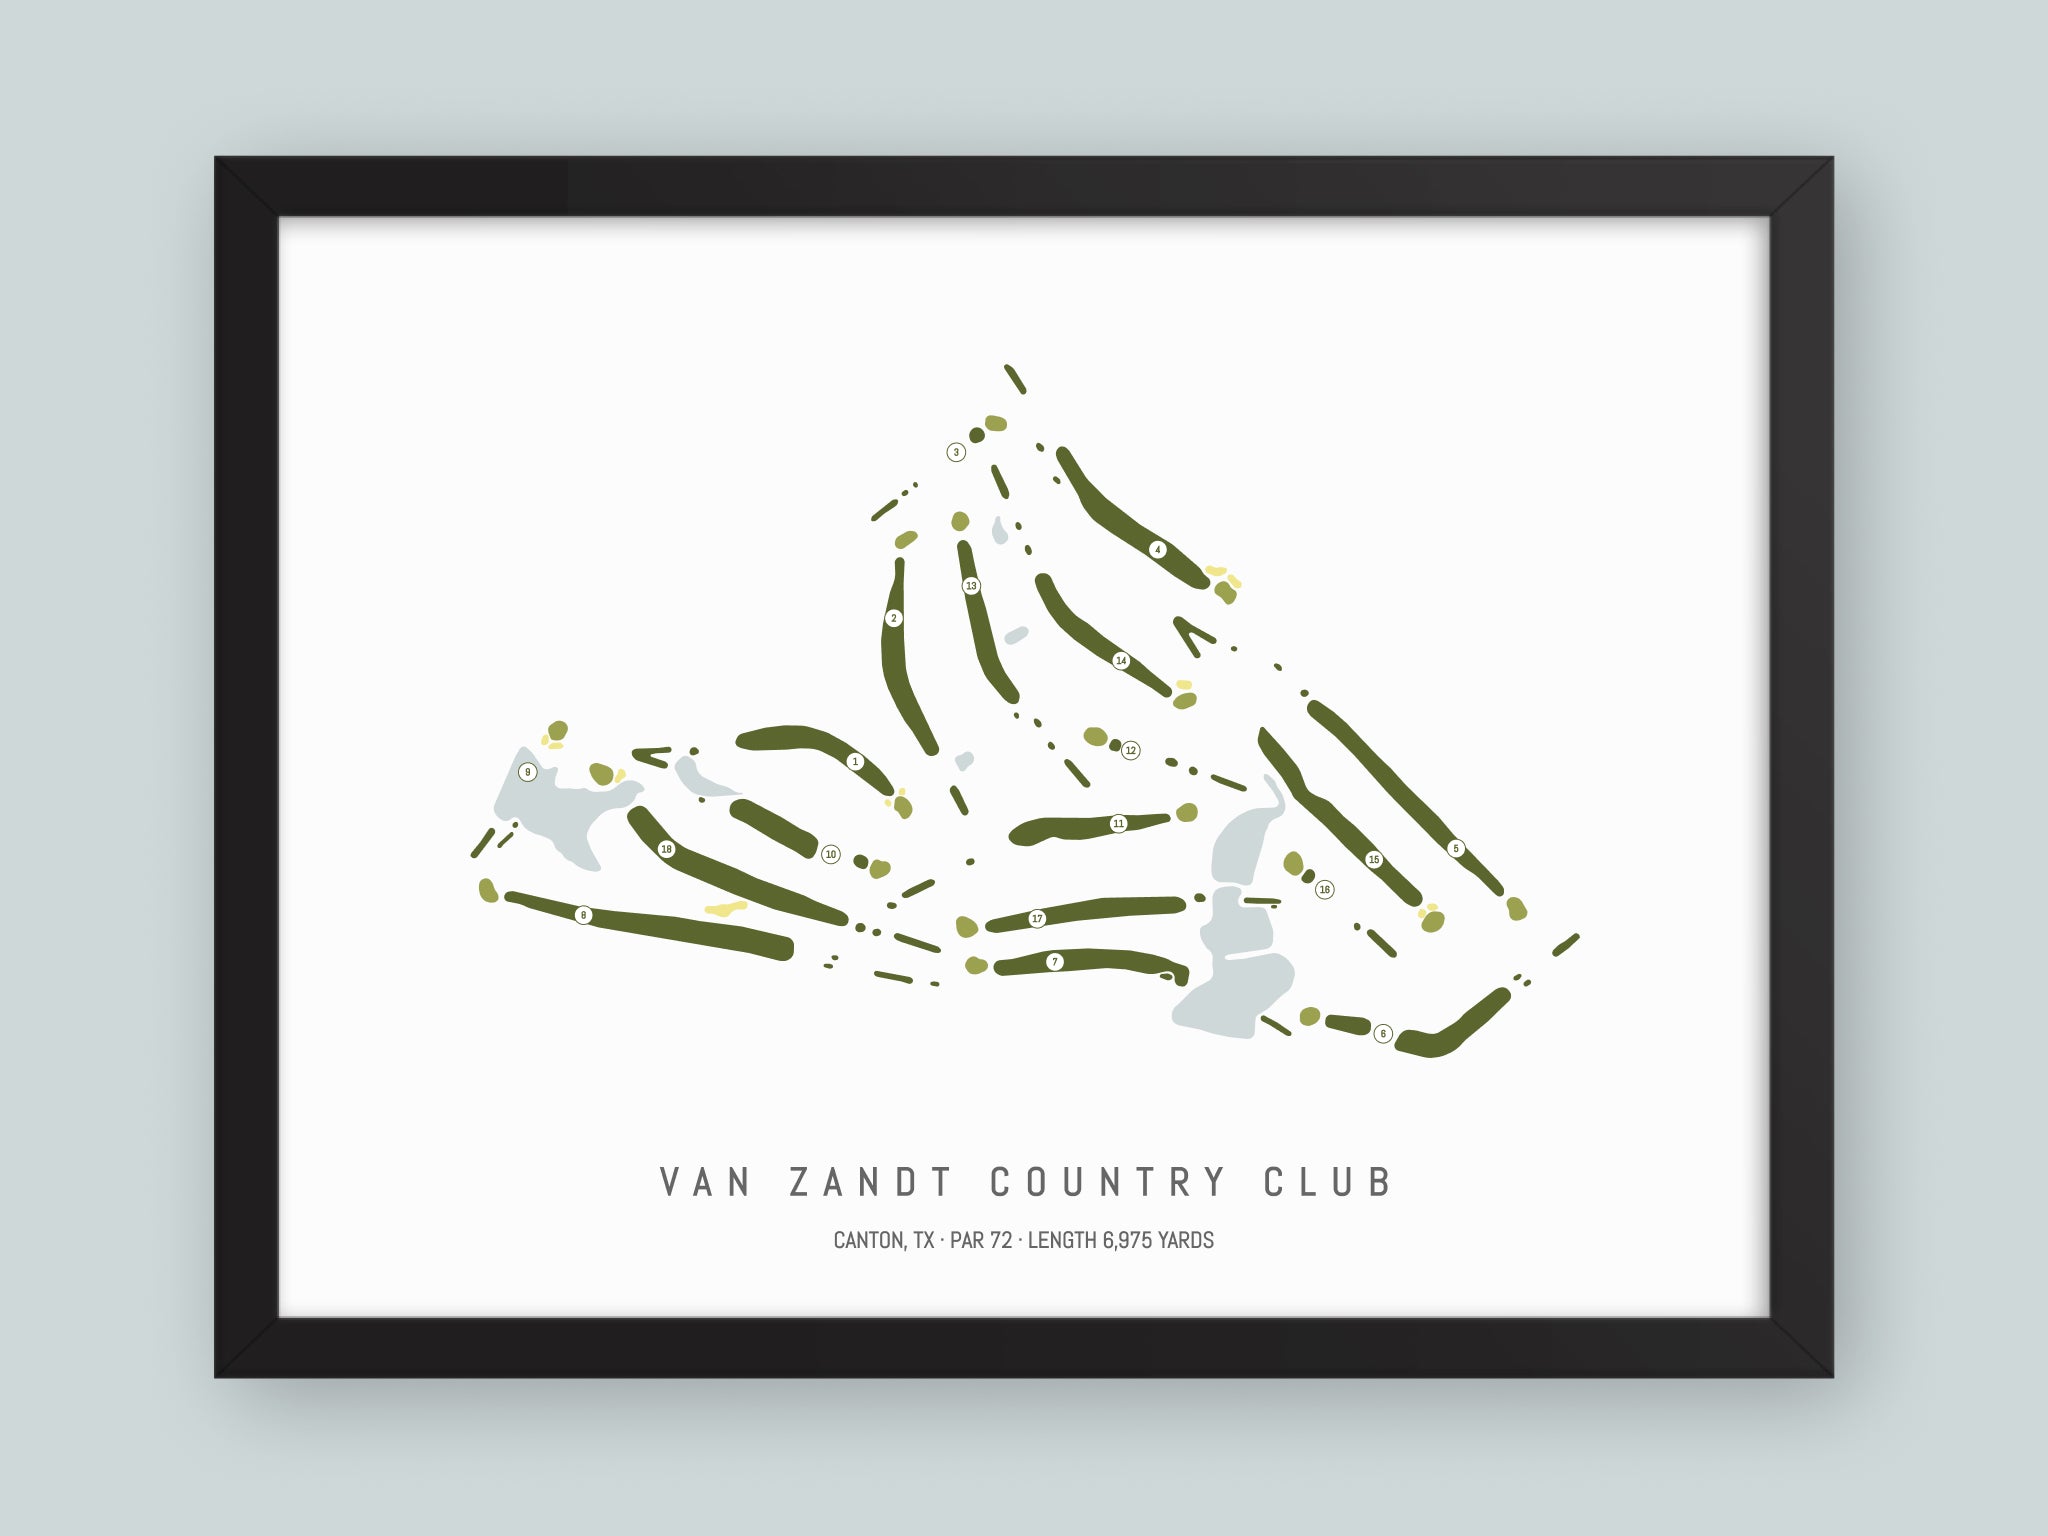 Van-Zandt-Country-Club-TX--Black-Frame-24x18-With-Hole-Numbers